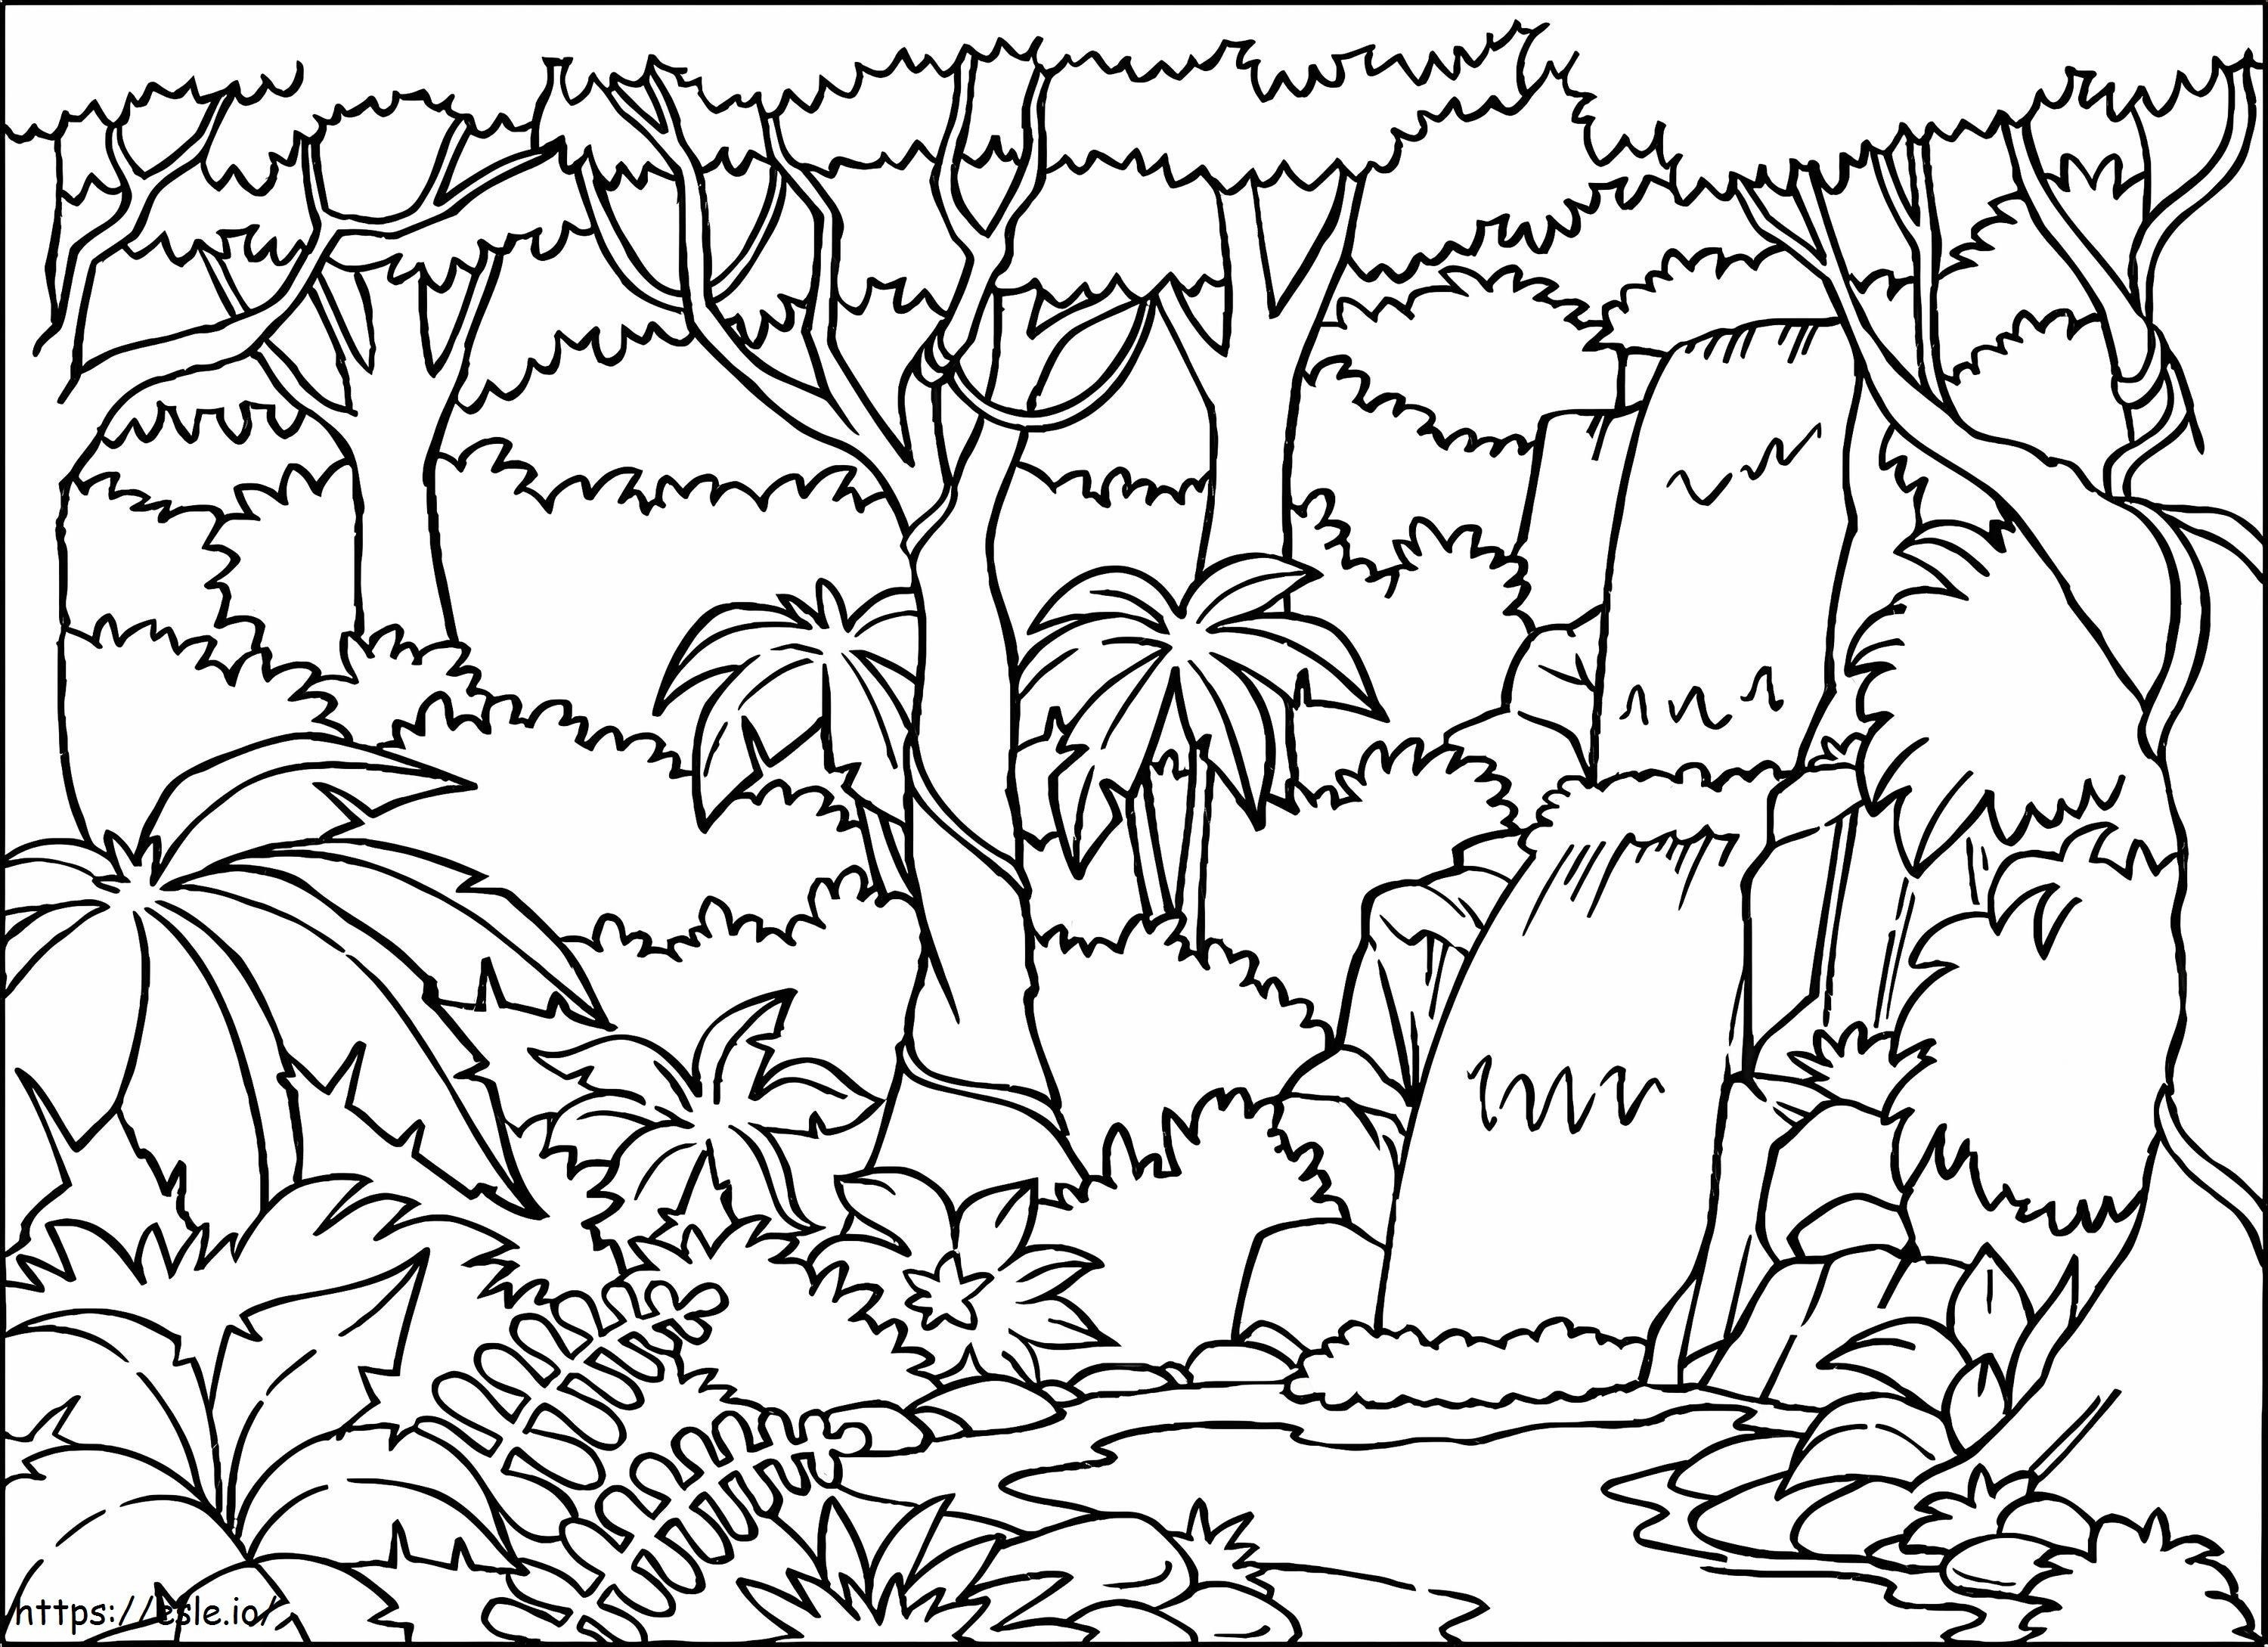 Jungle 1 coloring page